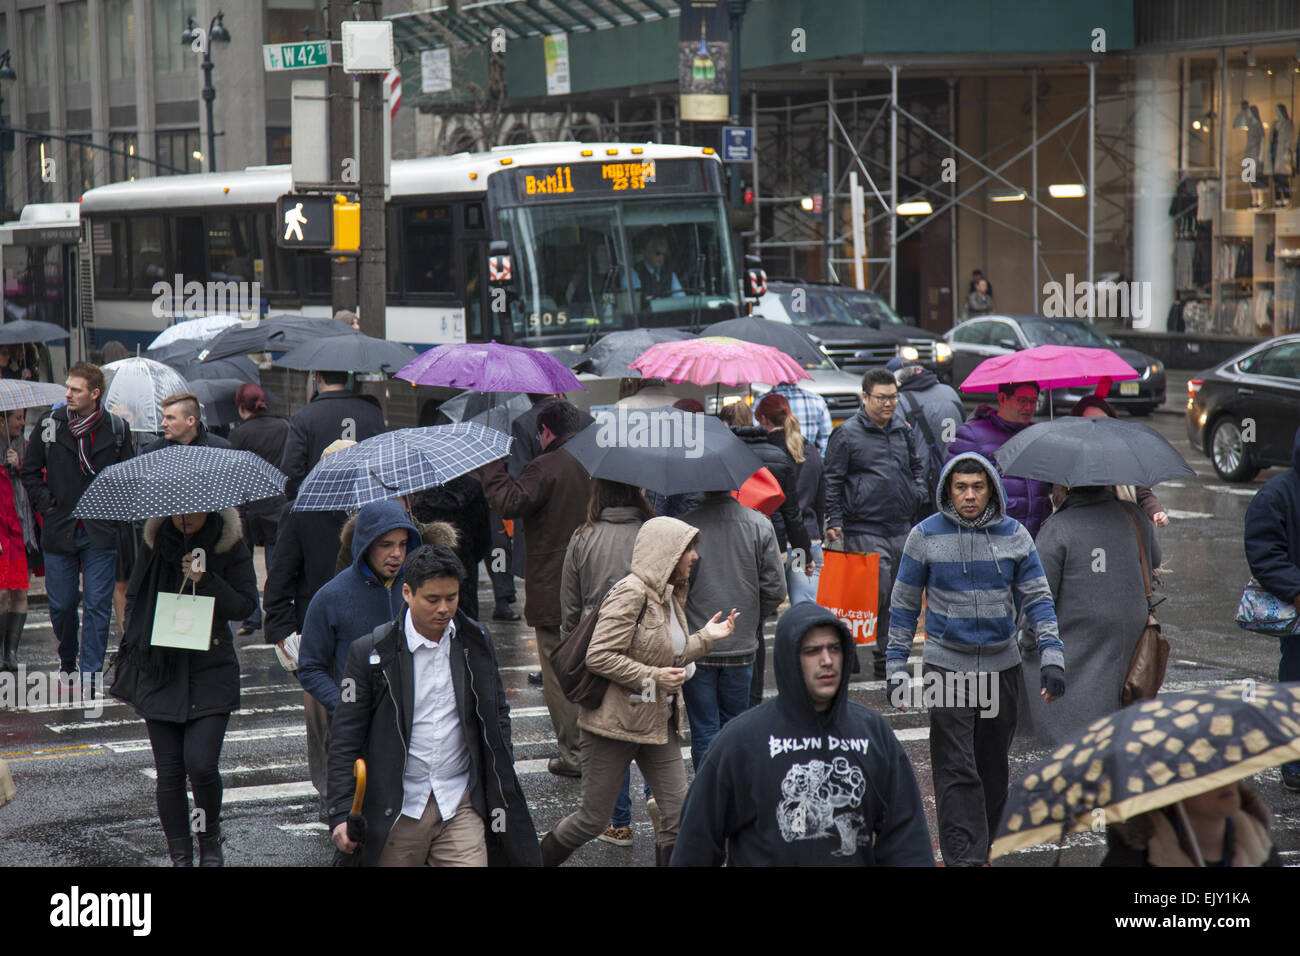 The street remains busy with umbrellas up on a rainy day in midtown Manhattan. Stock Photo